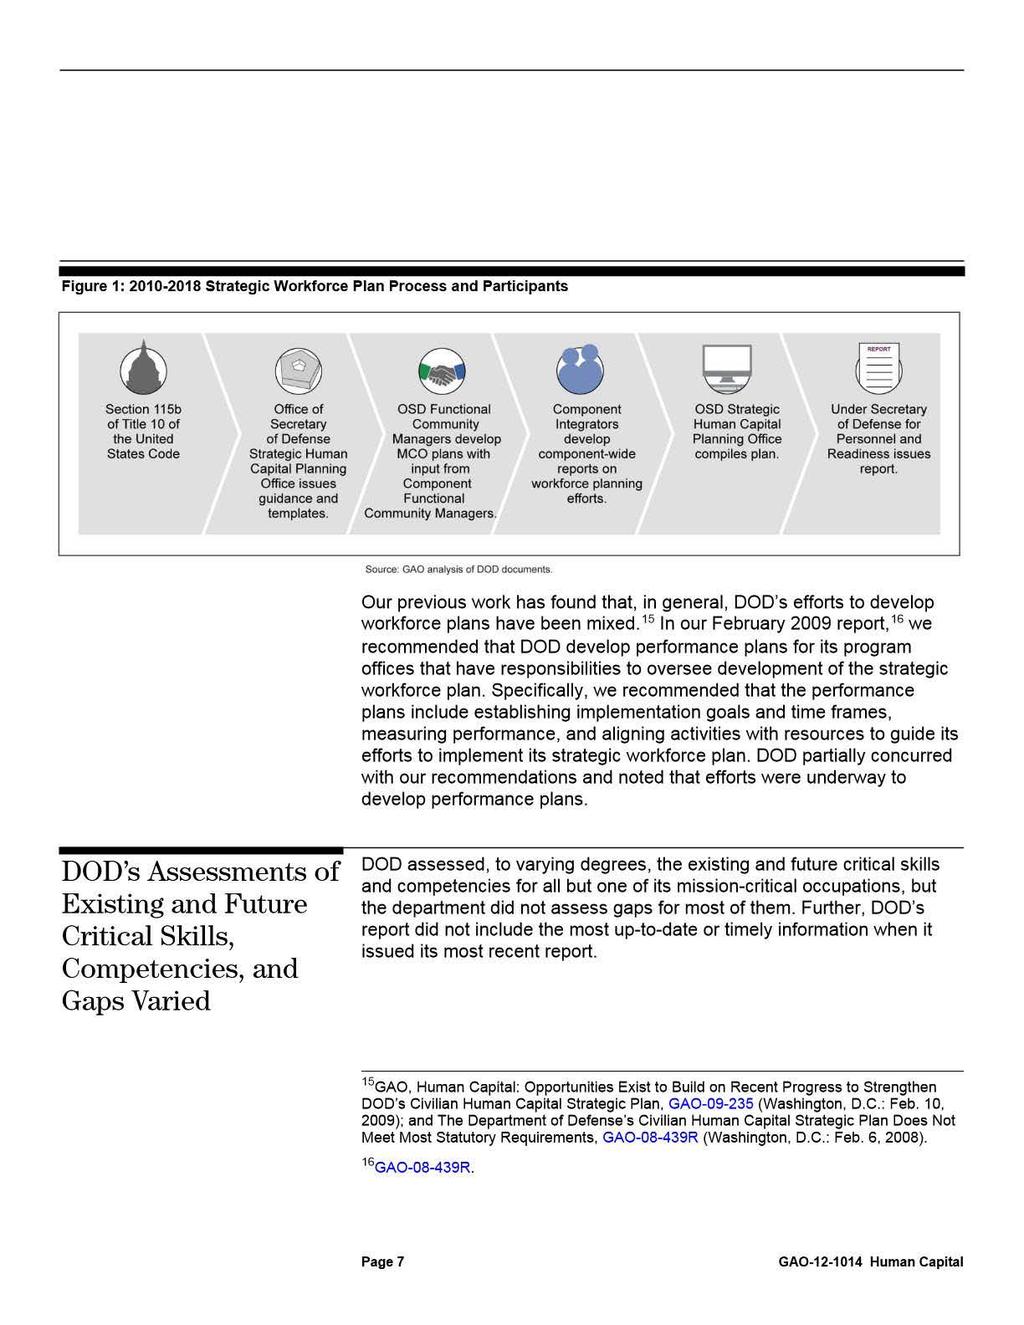 Figure 1: 2010-2018 Strategic Workforce Plan Process and Participants Section 115b of Title 1 0 of the United States Code Office of Secretary of Defense Strategic Human Capital Planning Office issues